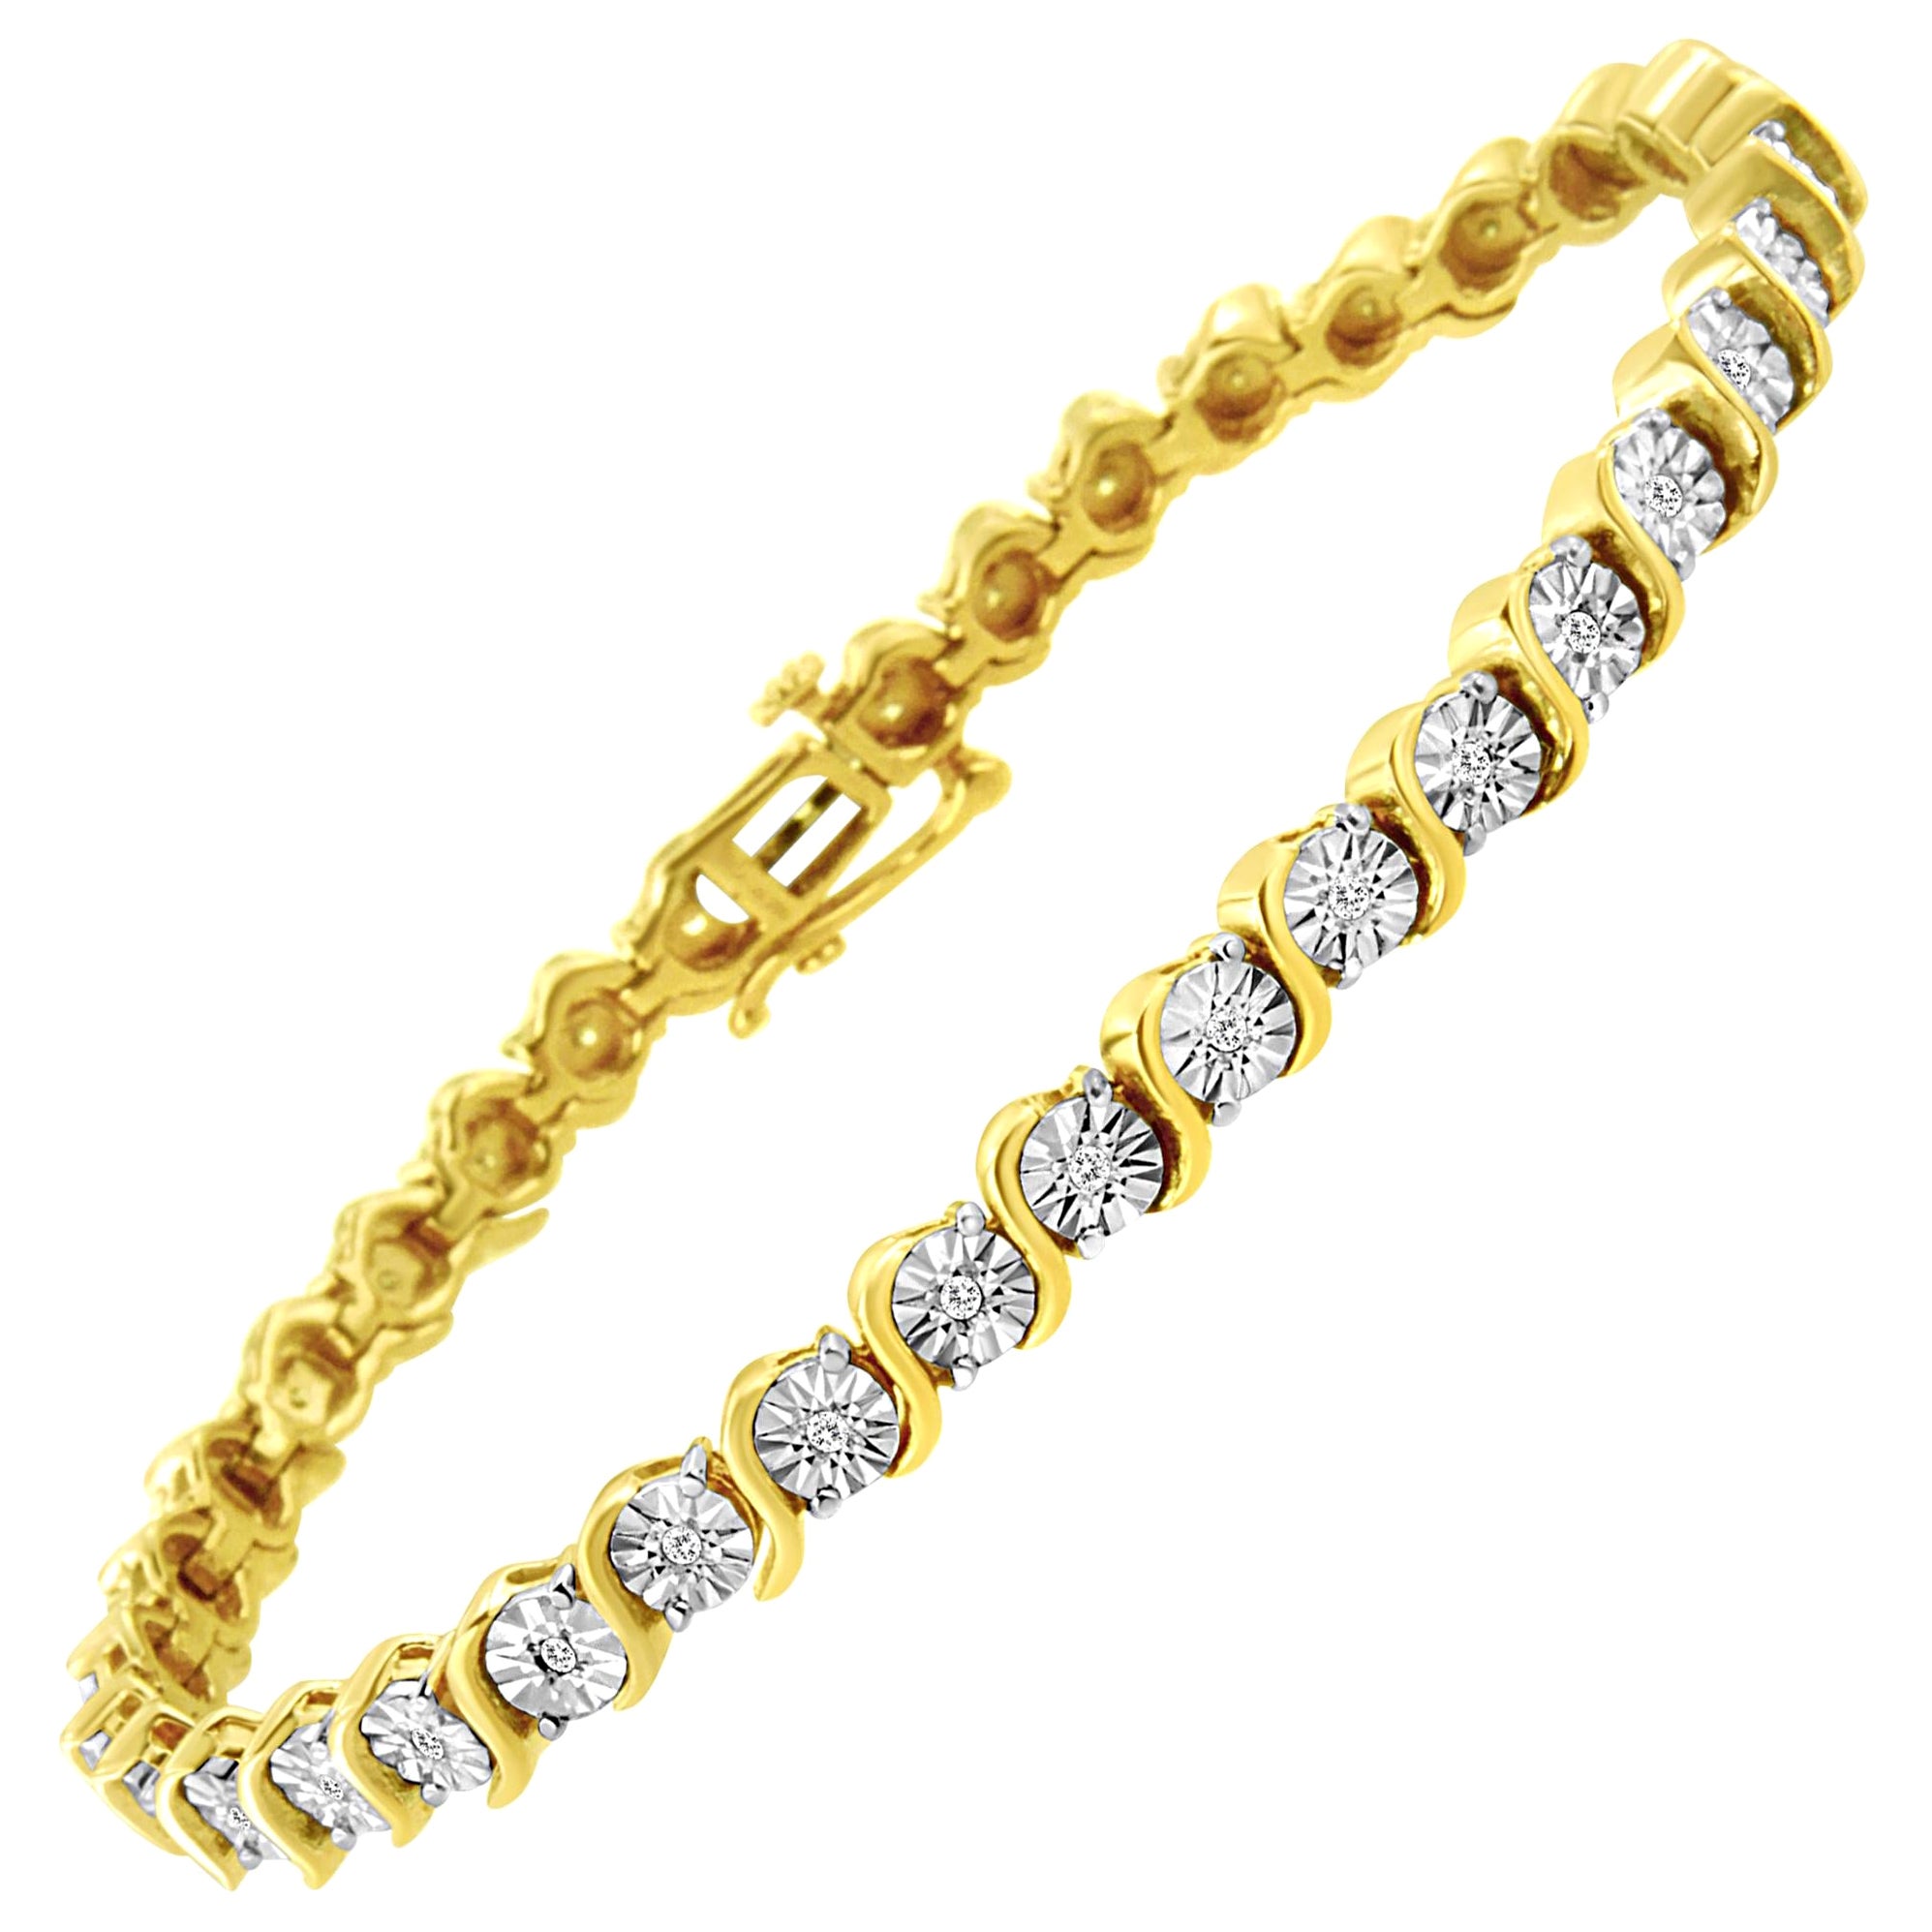 Yellow Gold Plated Sterling Silver 1/4 Carat Diamond "S" Link Tennis Bracelet